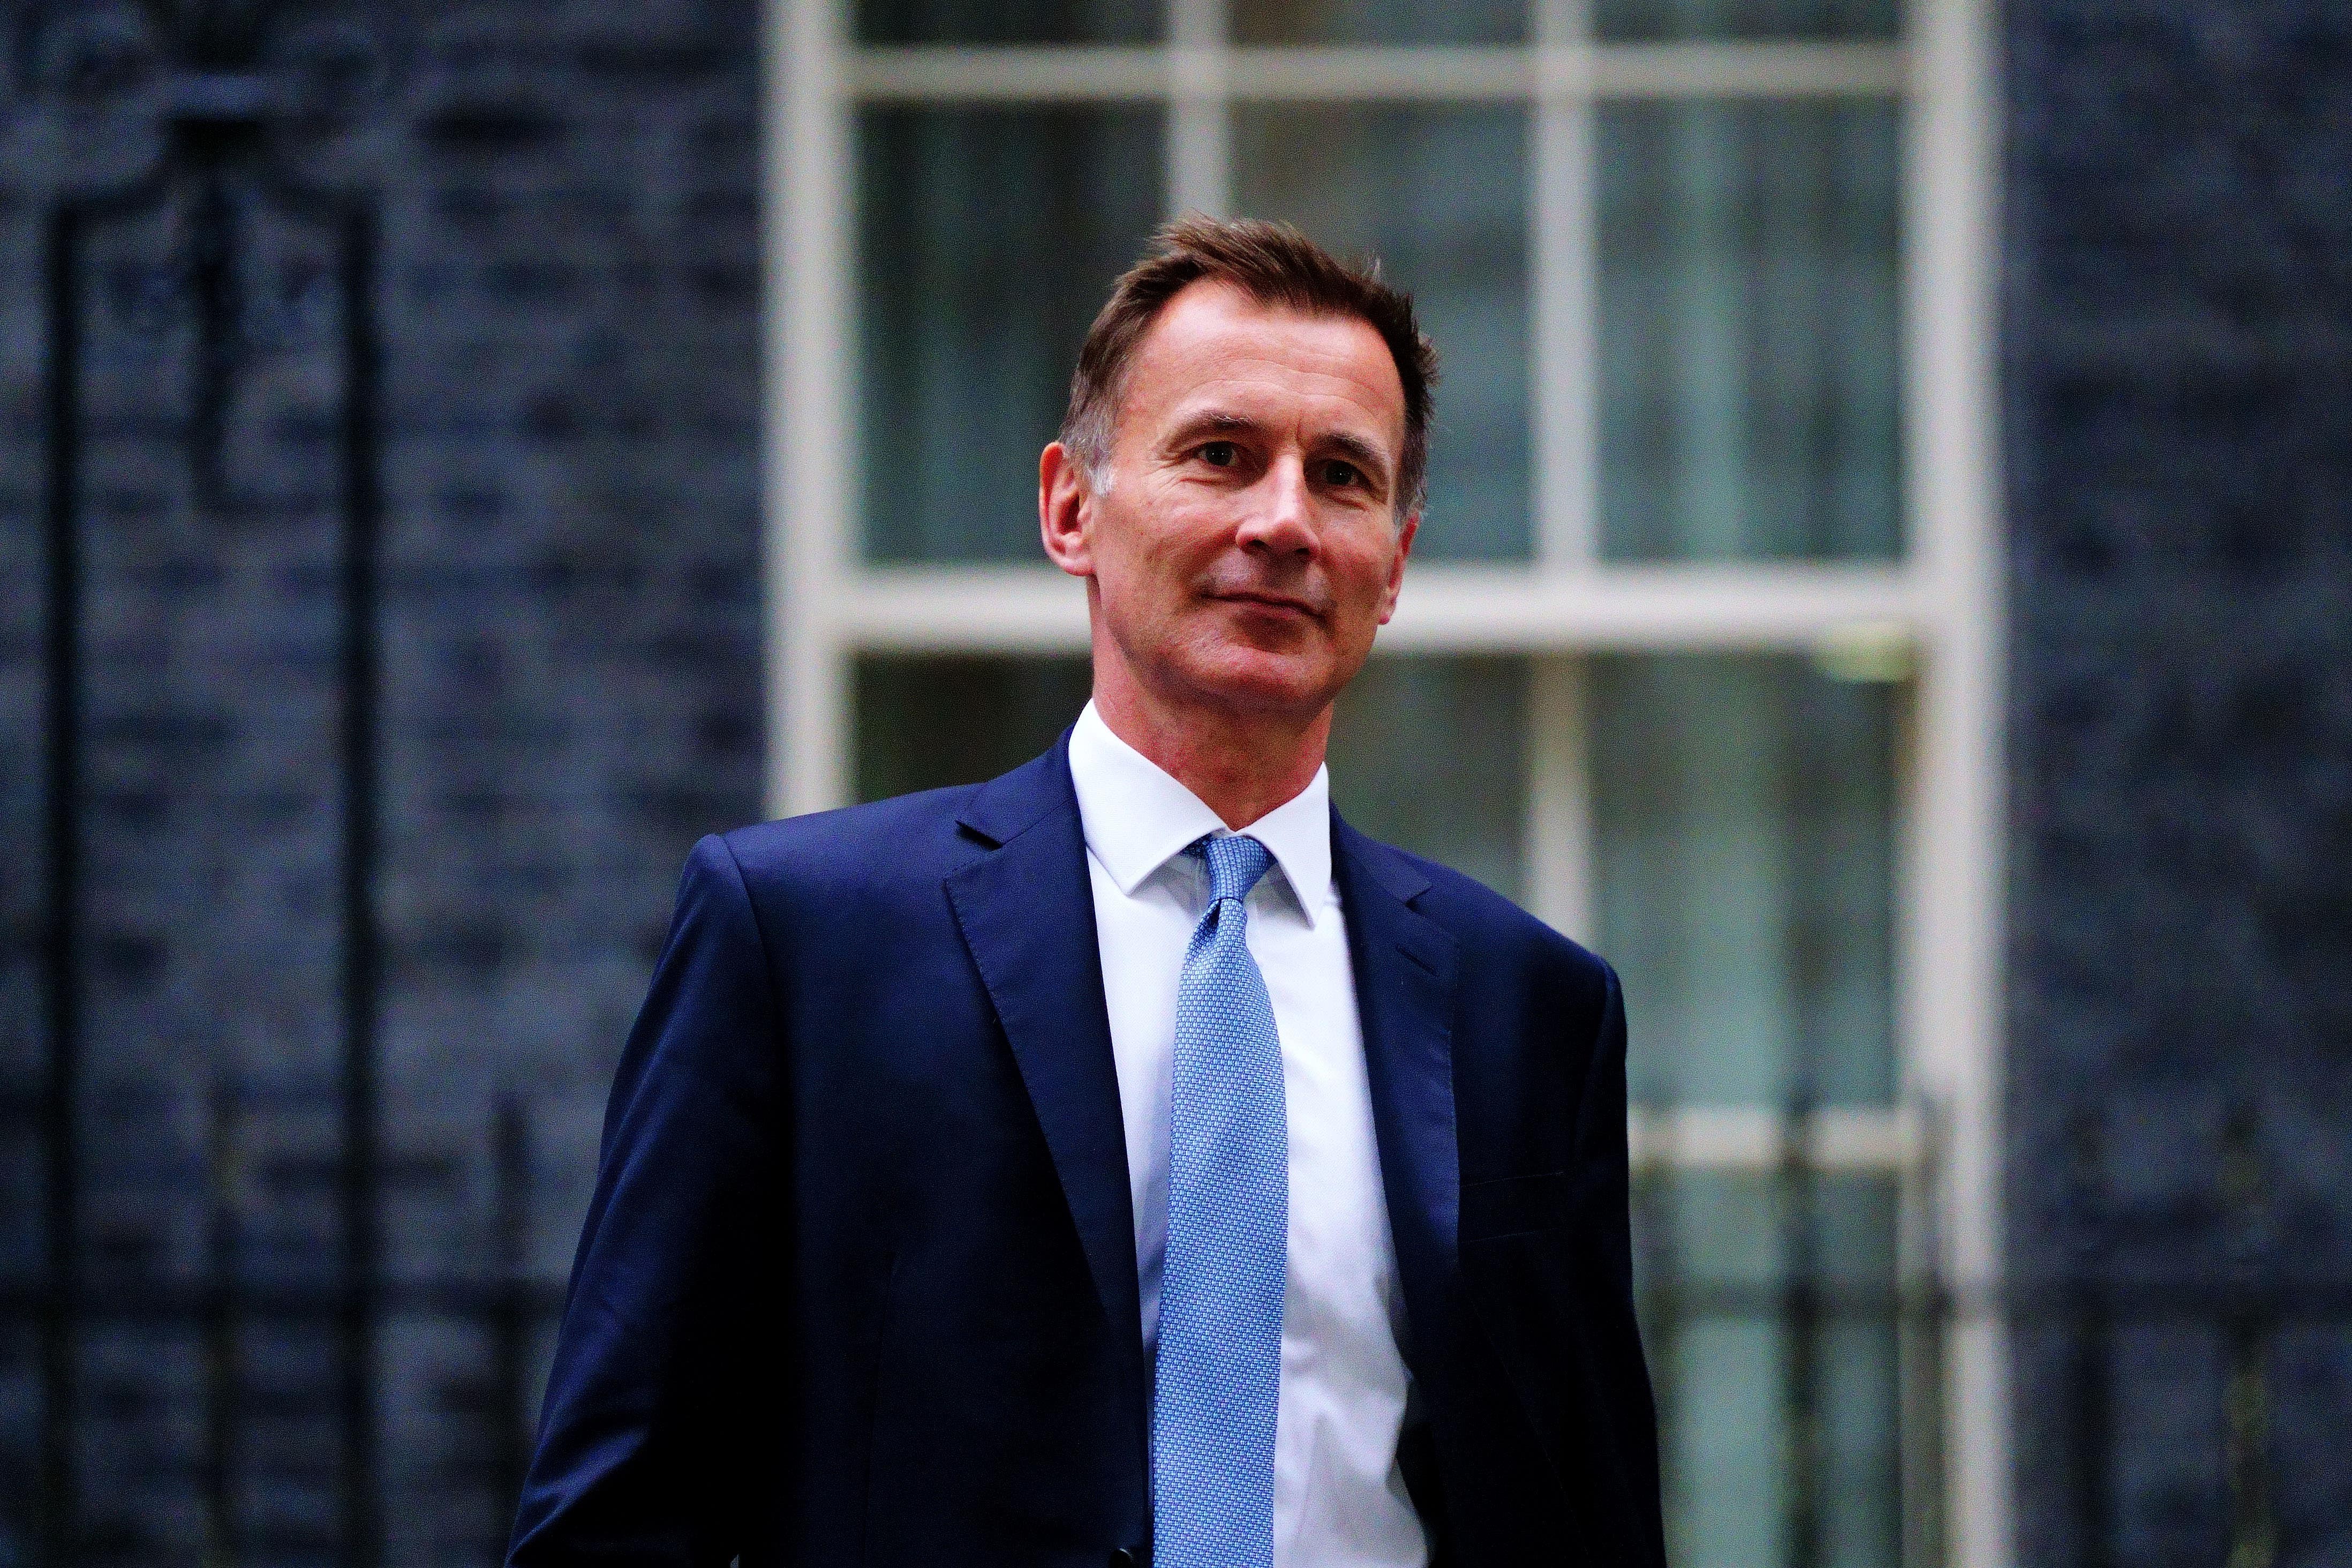 Jeremy Hunt leaves 10 Downing Street in London after he was appointed Chancellor of the Exchequer following the resignation of Kwasi Kwarteng (Victoria Jones/PA)